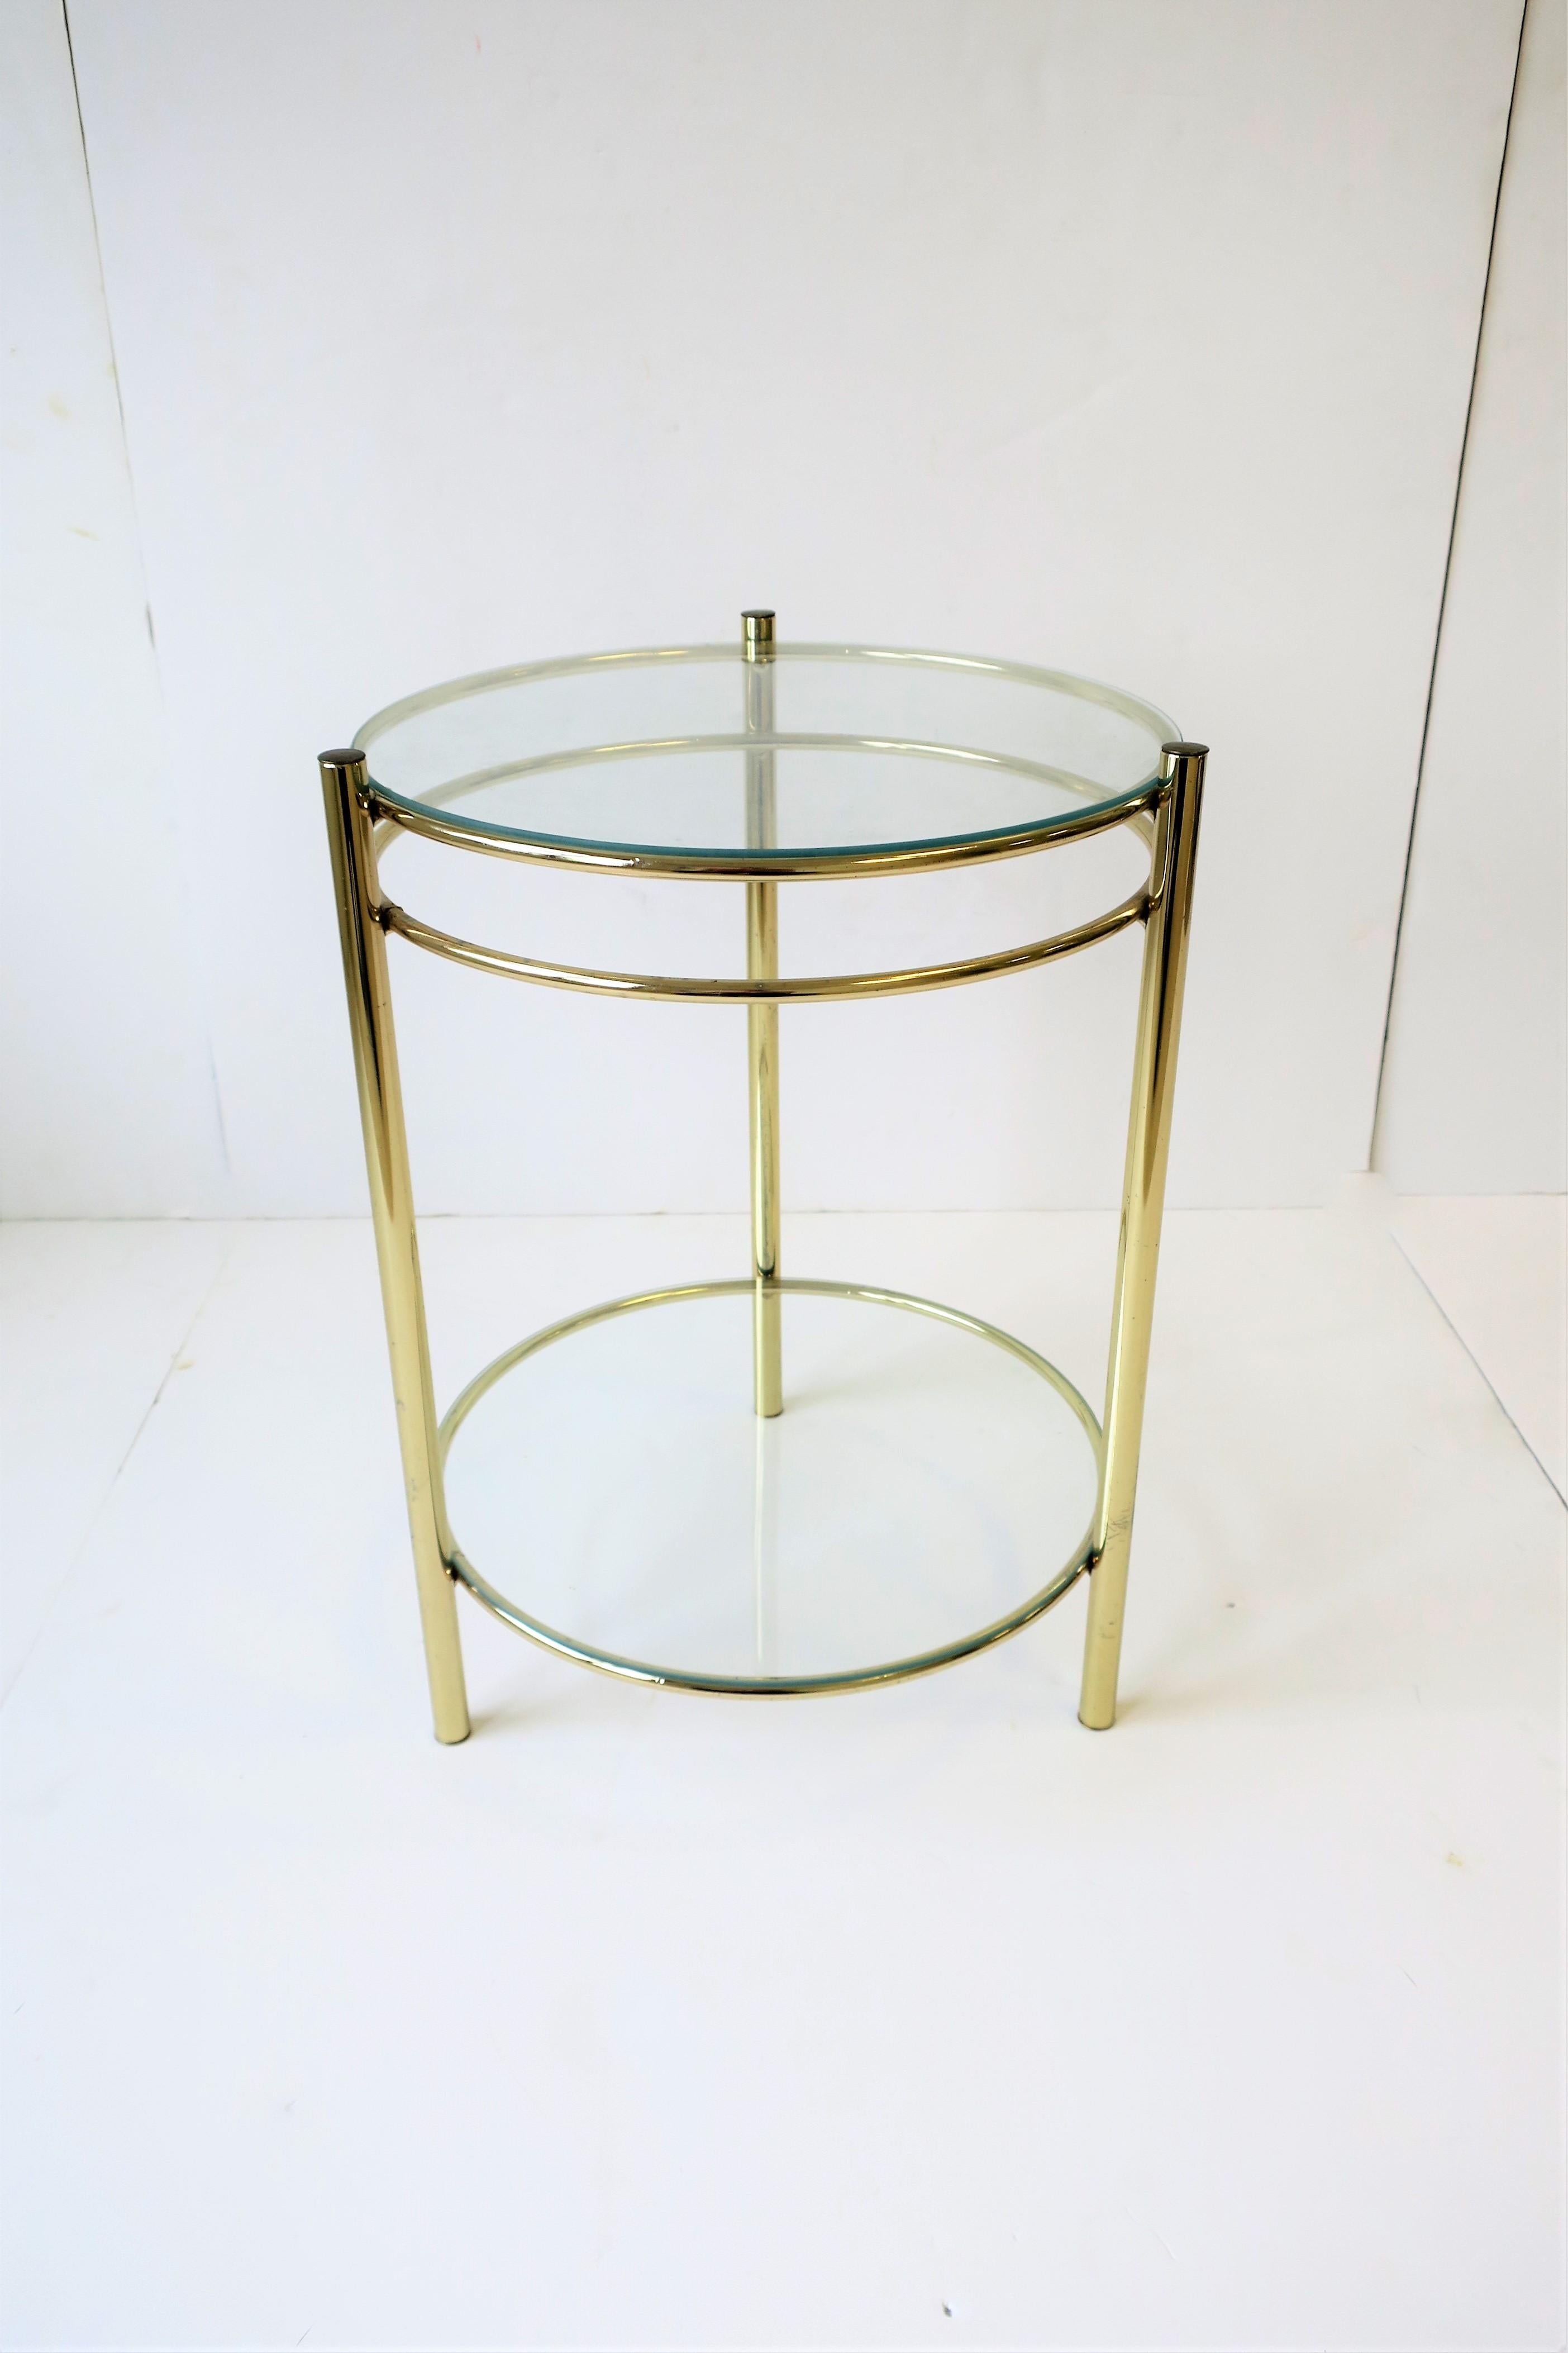 A small round brass plated metal and glass side or drinks table with lower shelf. Table is a convenient size measuring: 17